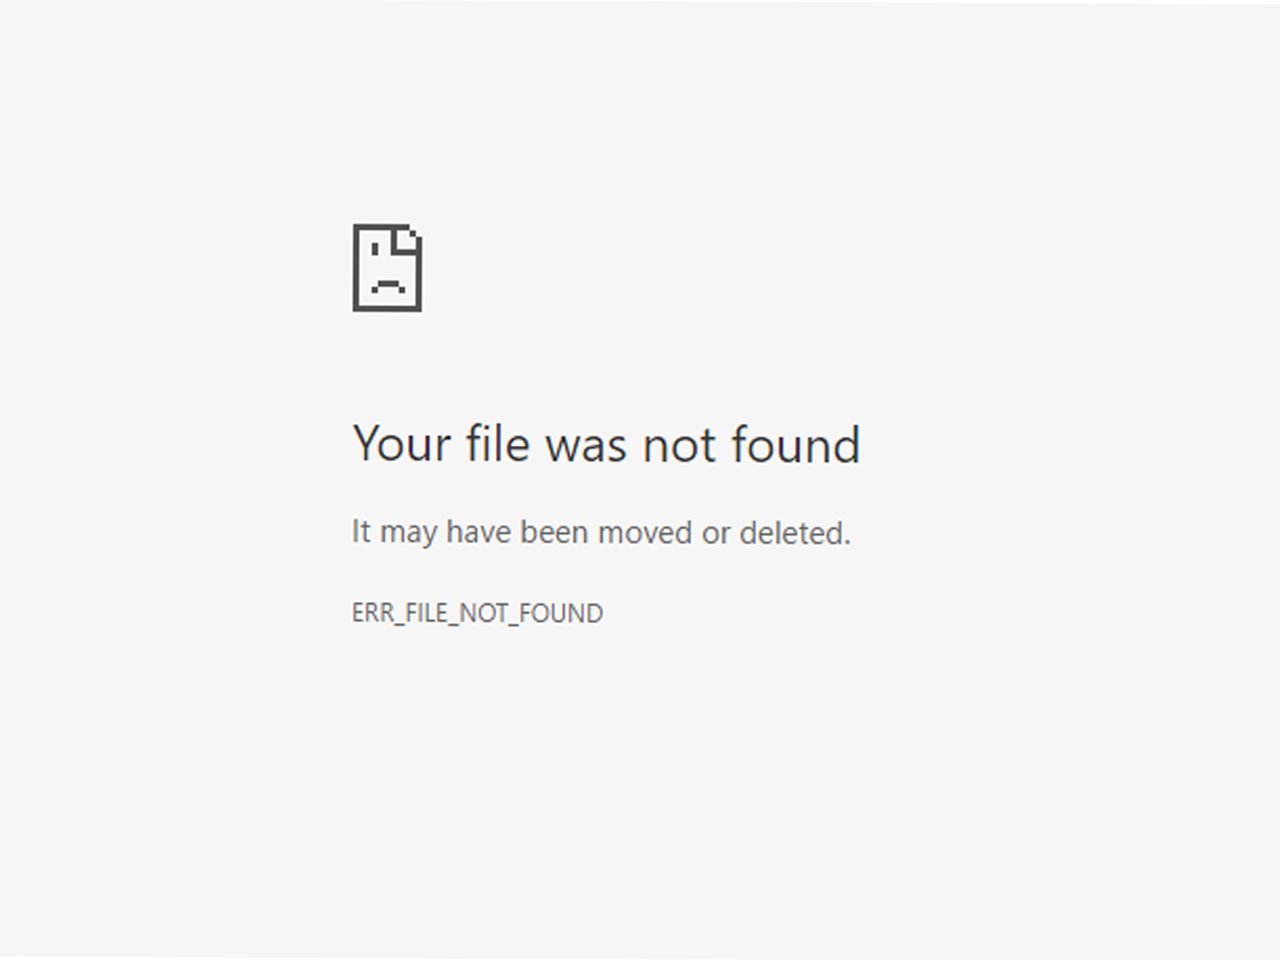 Err_file_not_found файл. Error file not found. Файл не найден фото. Код буллет. This files is not supported